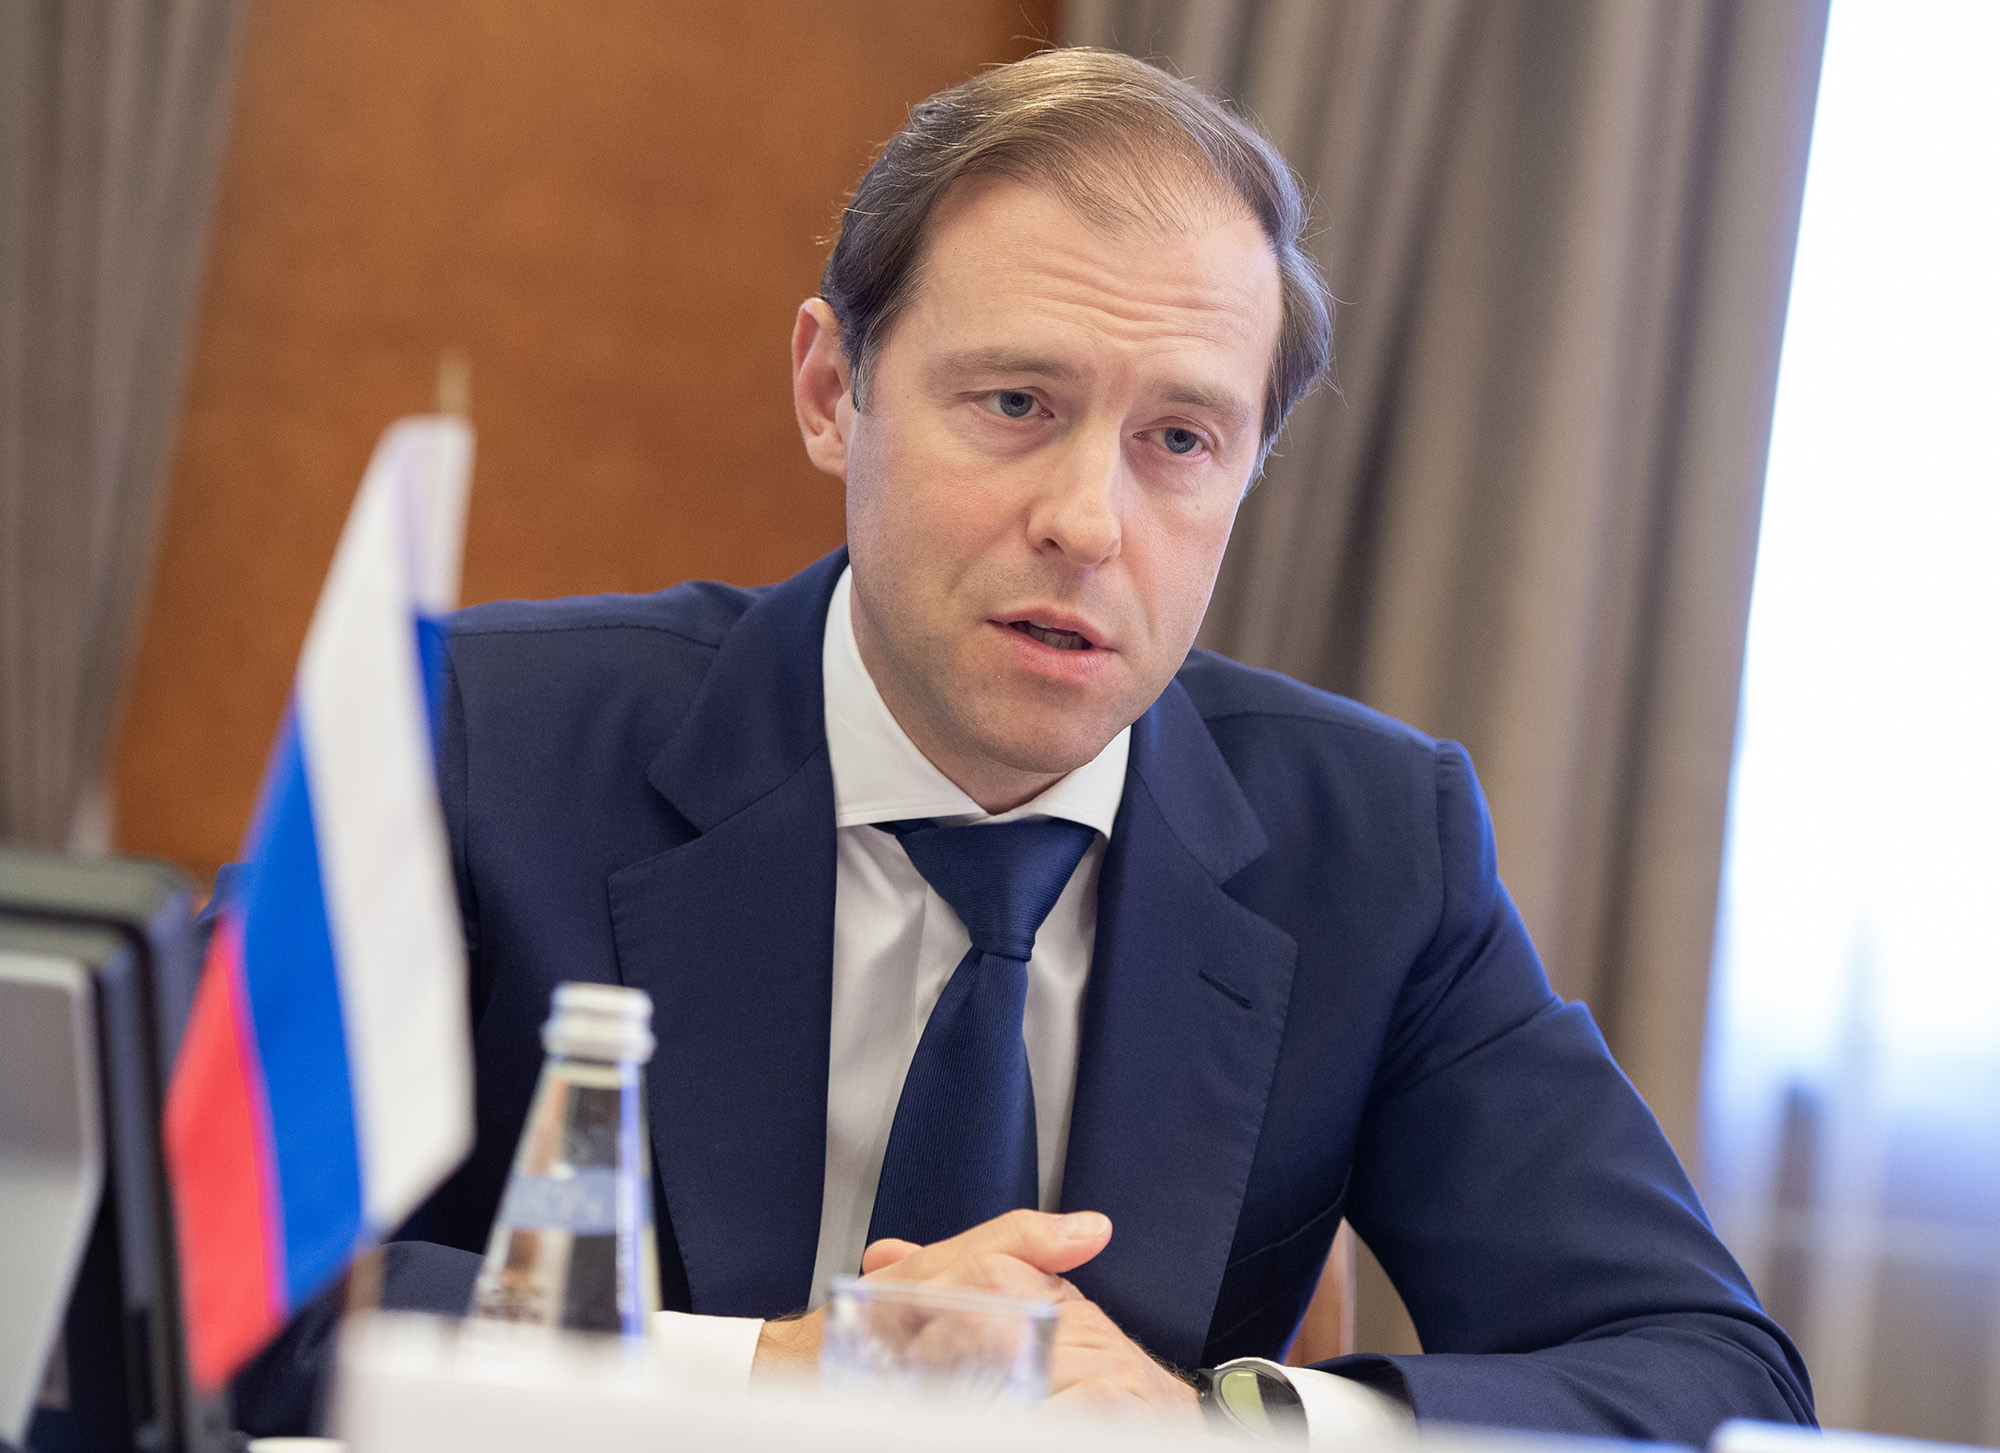 Russian Industry Minister Denis Manturov meets his German counterpart in Moscow, Russia May 14, 2018. He has now been sanctioned by the British government.